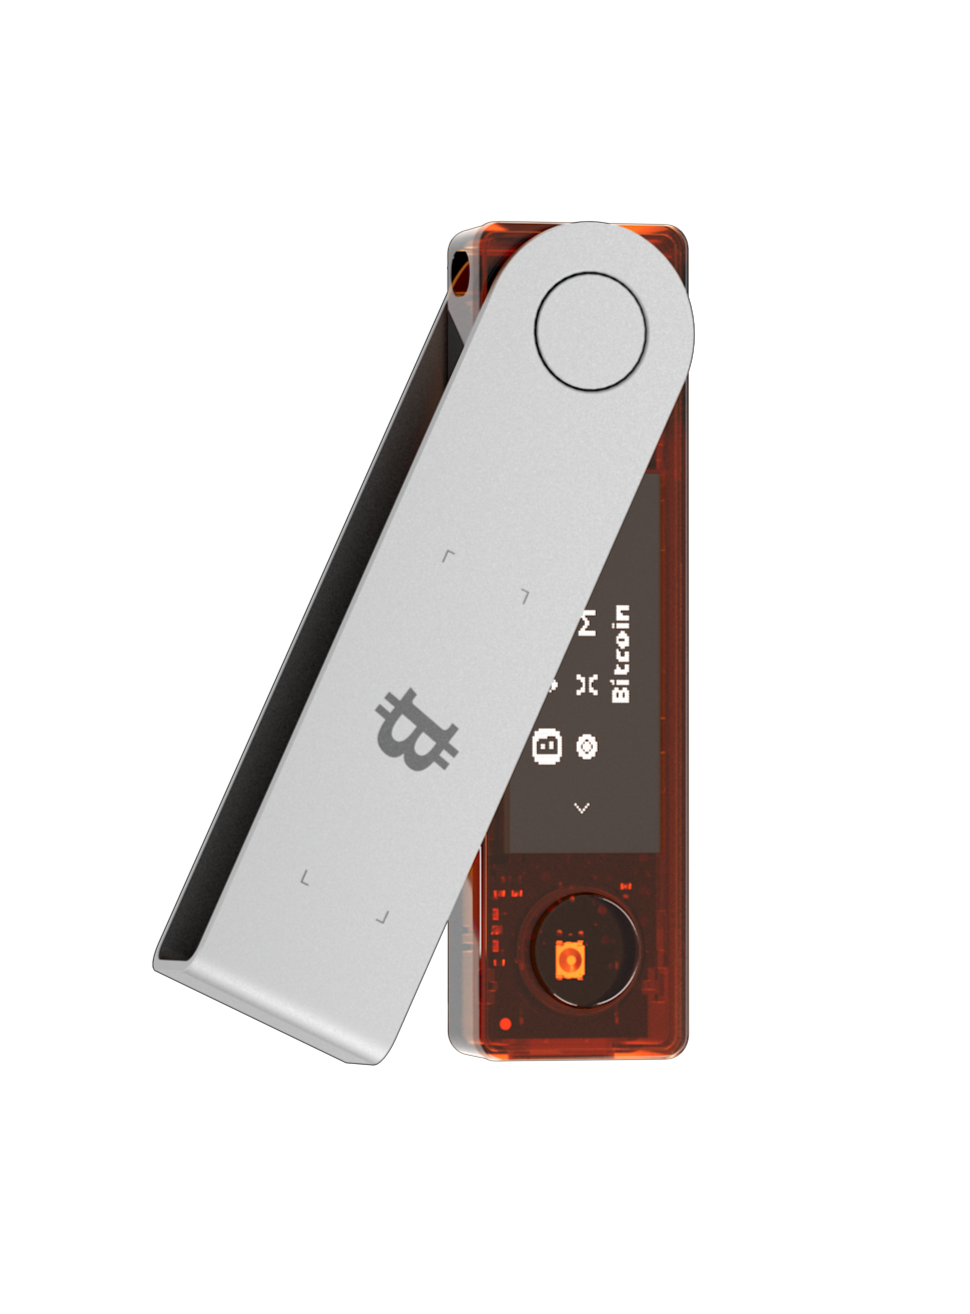 Review Ledger Nano X Hardware Wallet: Price, Security, Software, Supported  Coins